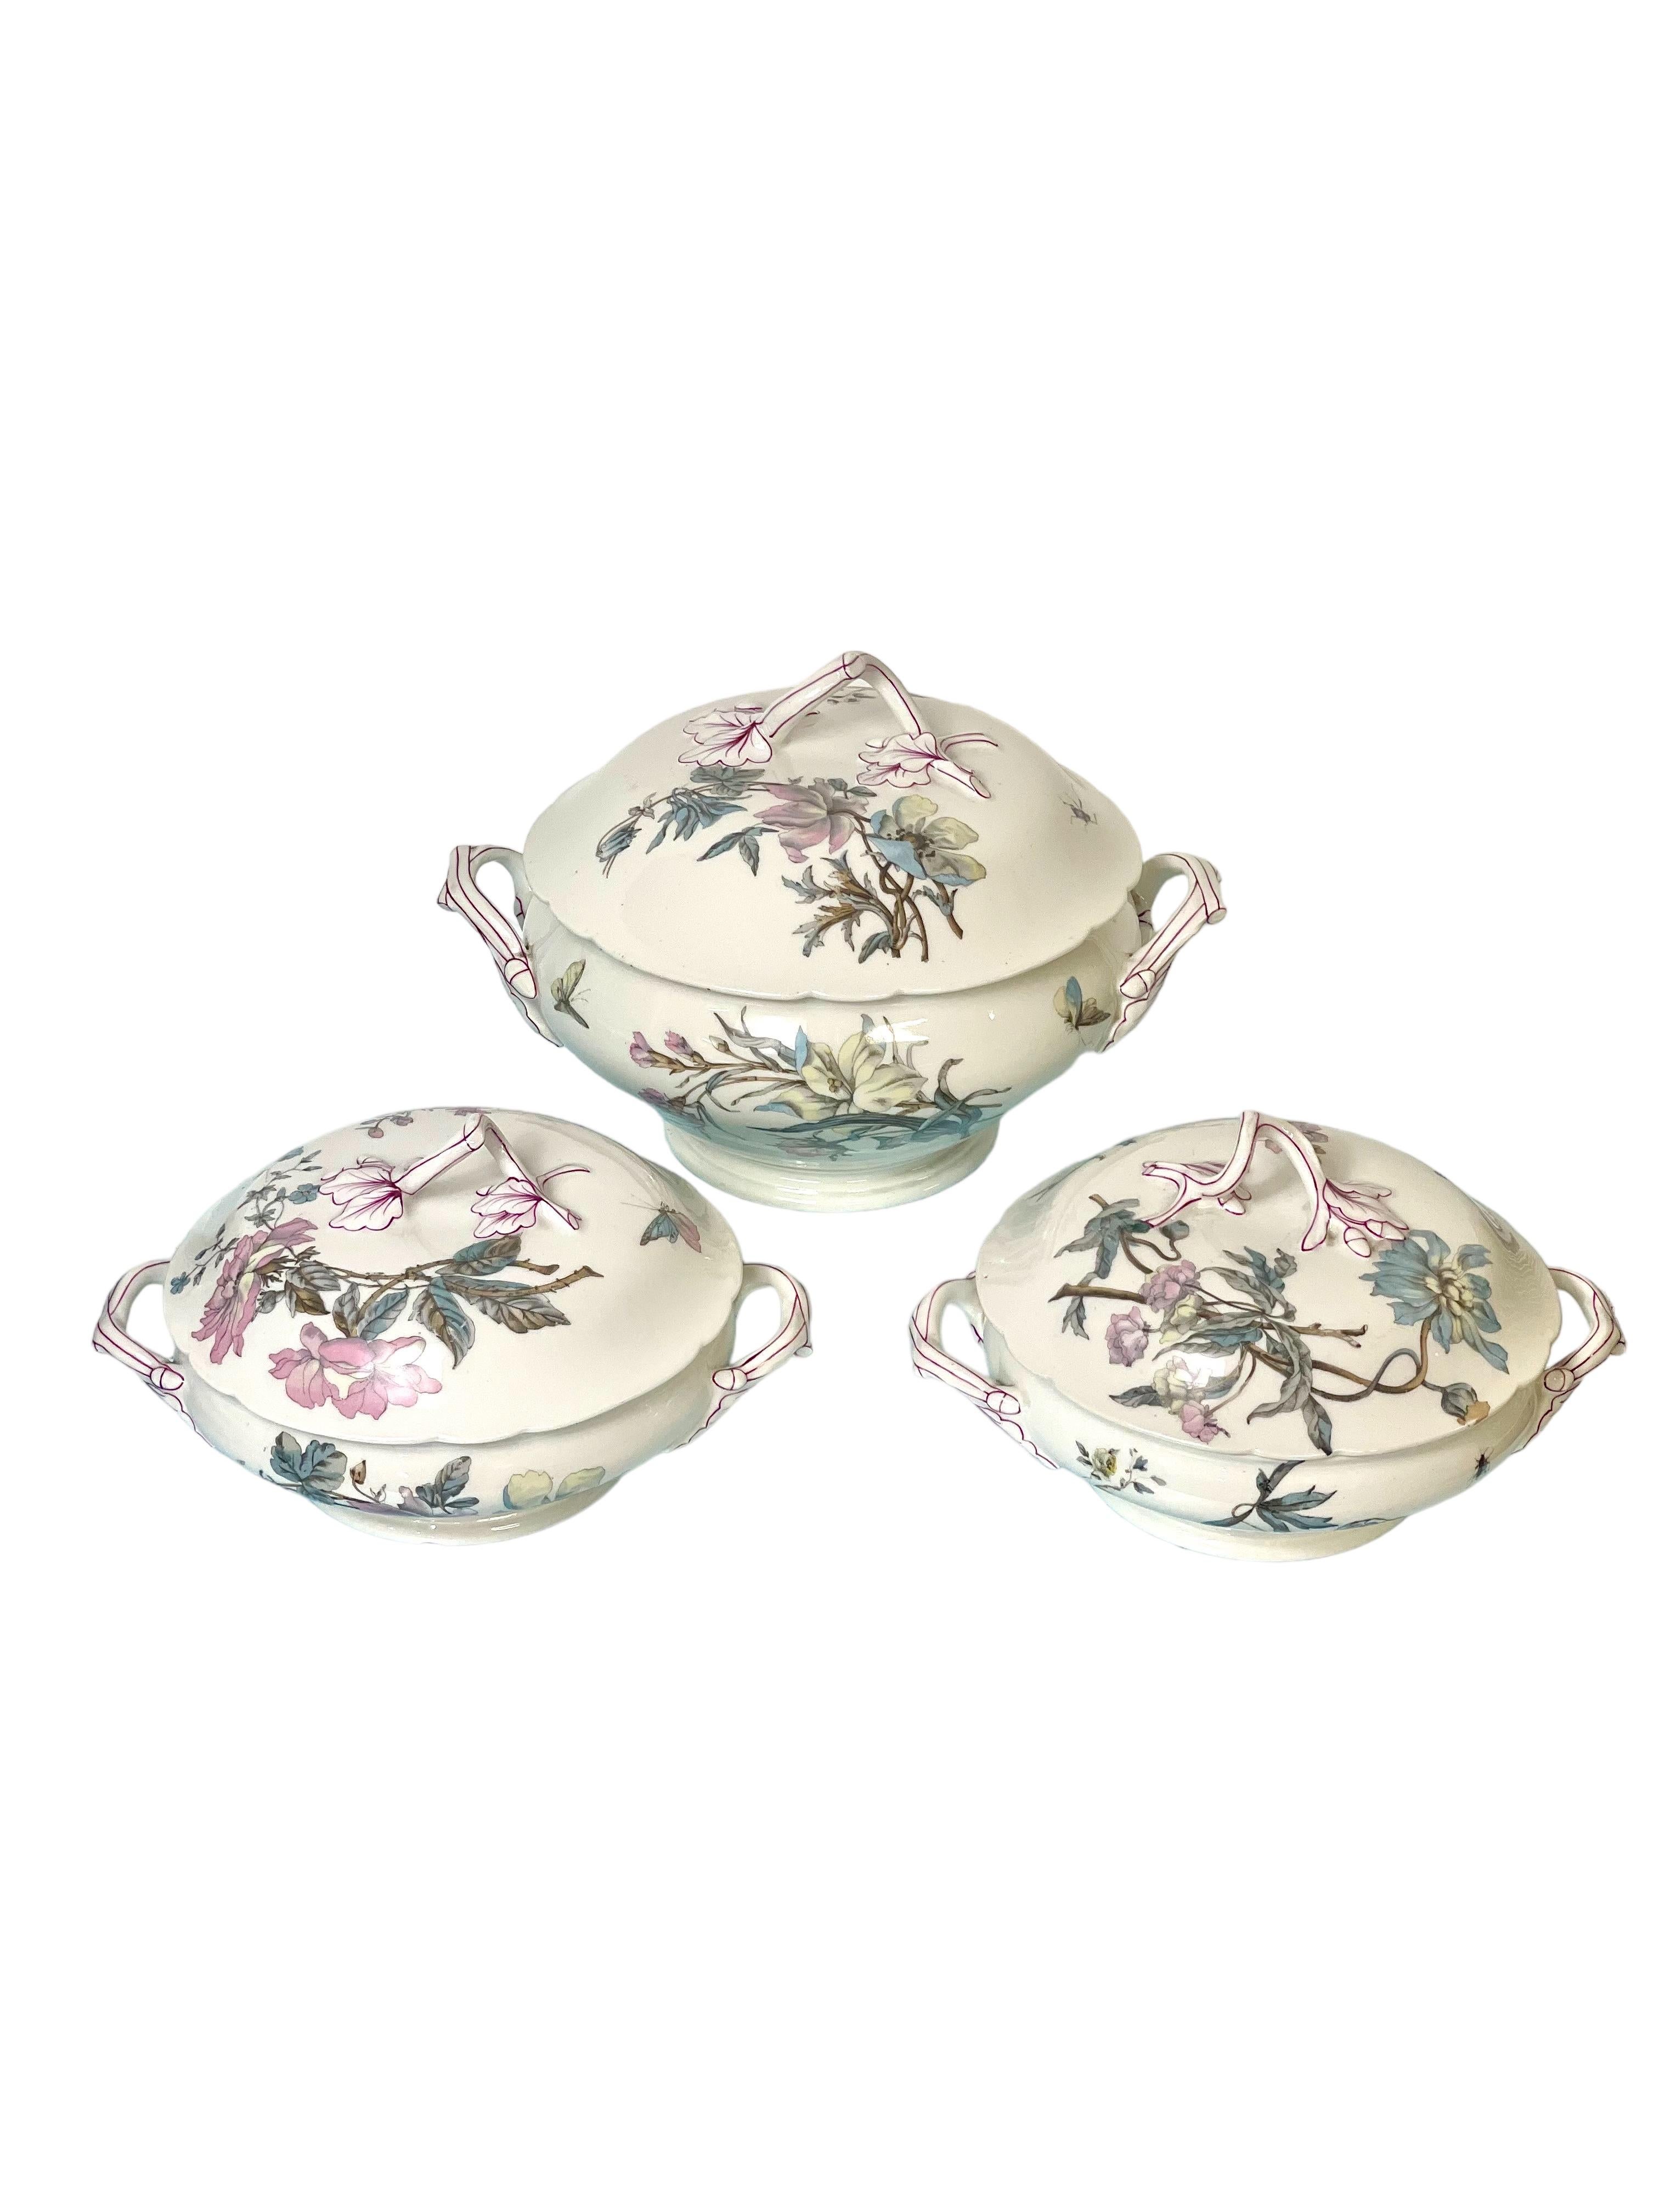 French 102-Piece Porcelain Dinner Service with Flowers and Butterflies